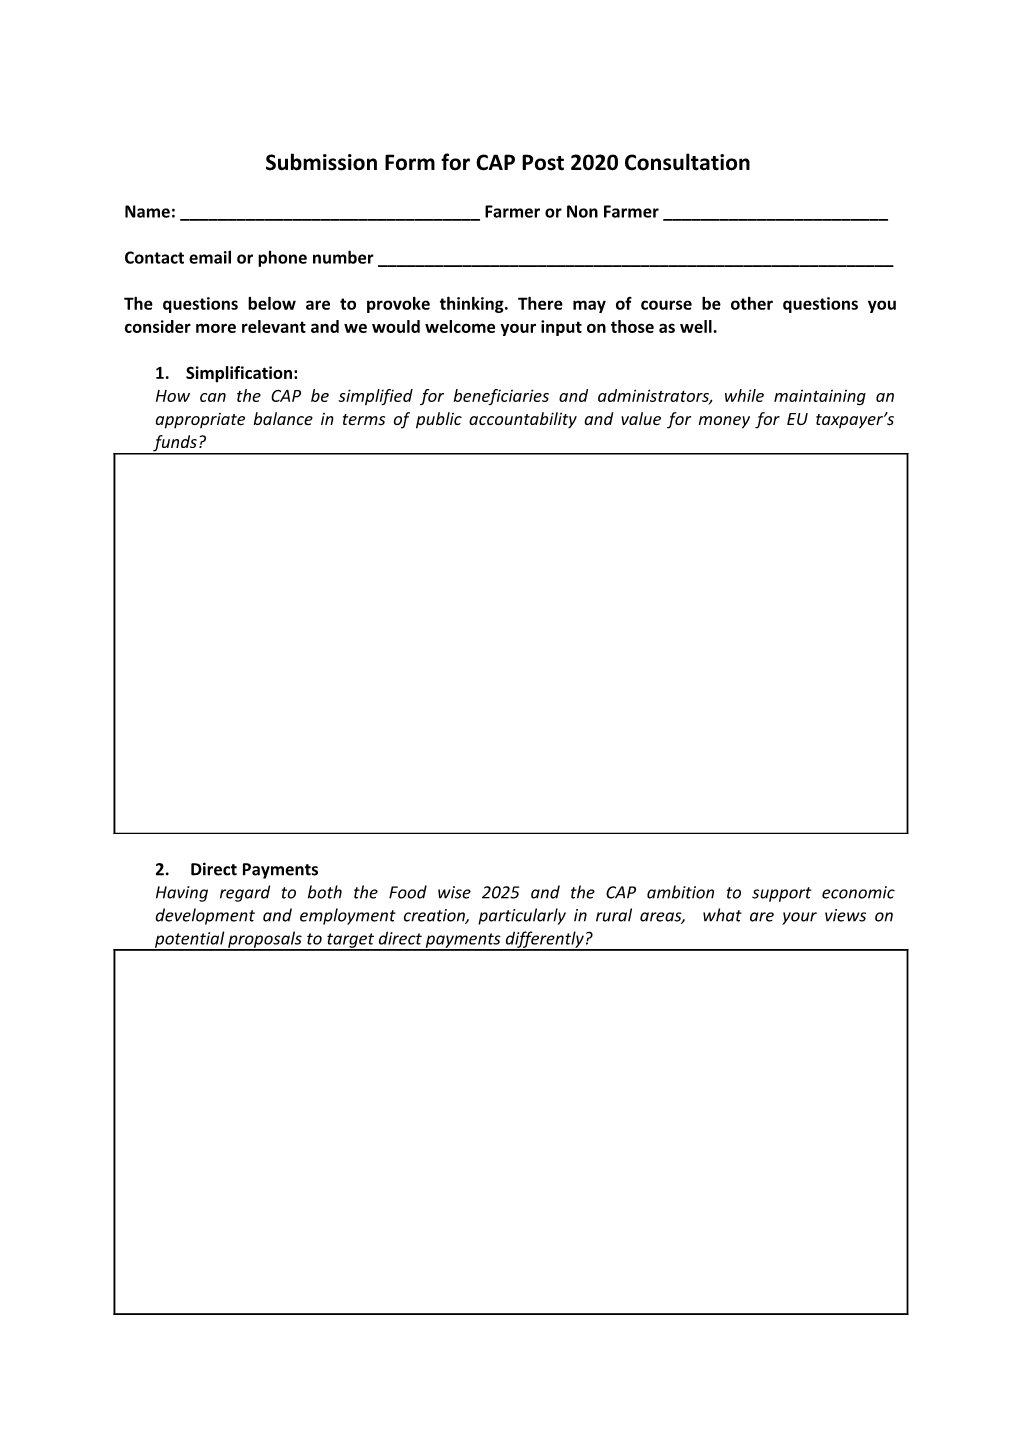 Submission Form for CAP Post 2020 Consultation